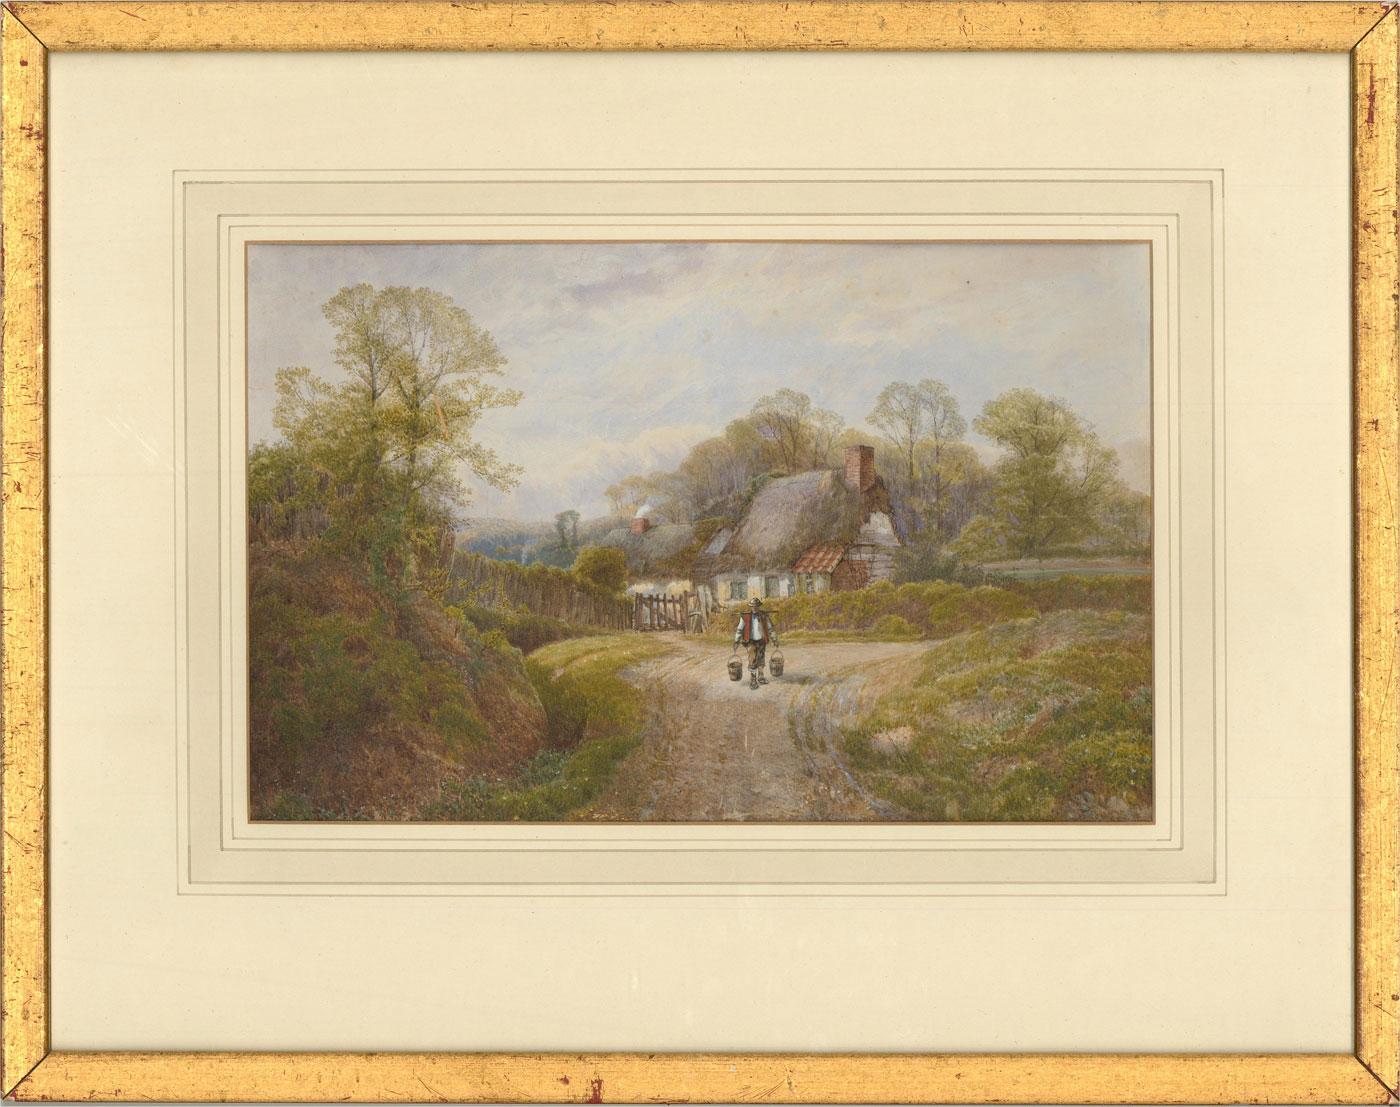 Unknown Landscape Art - Early 20th Century Watercolour - Figure on a Country Lane